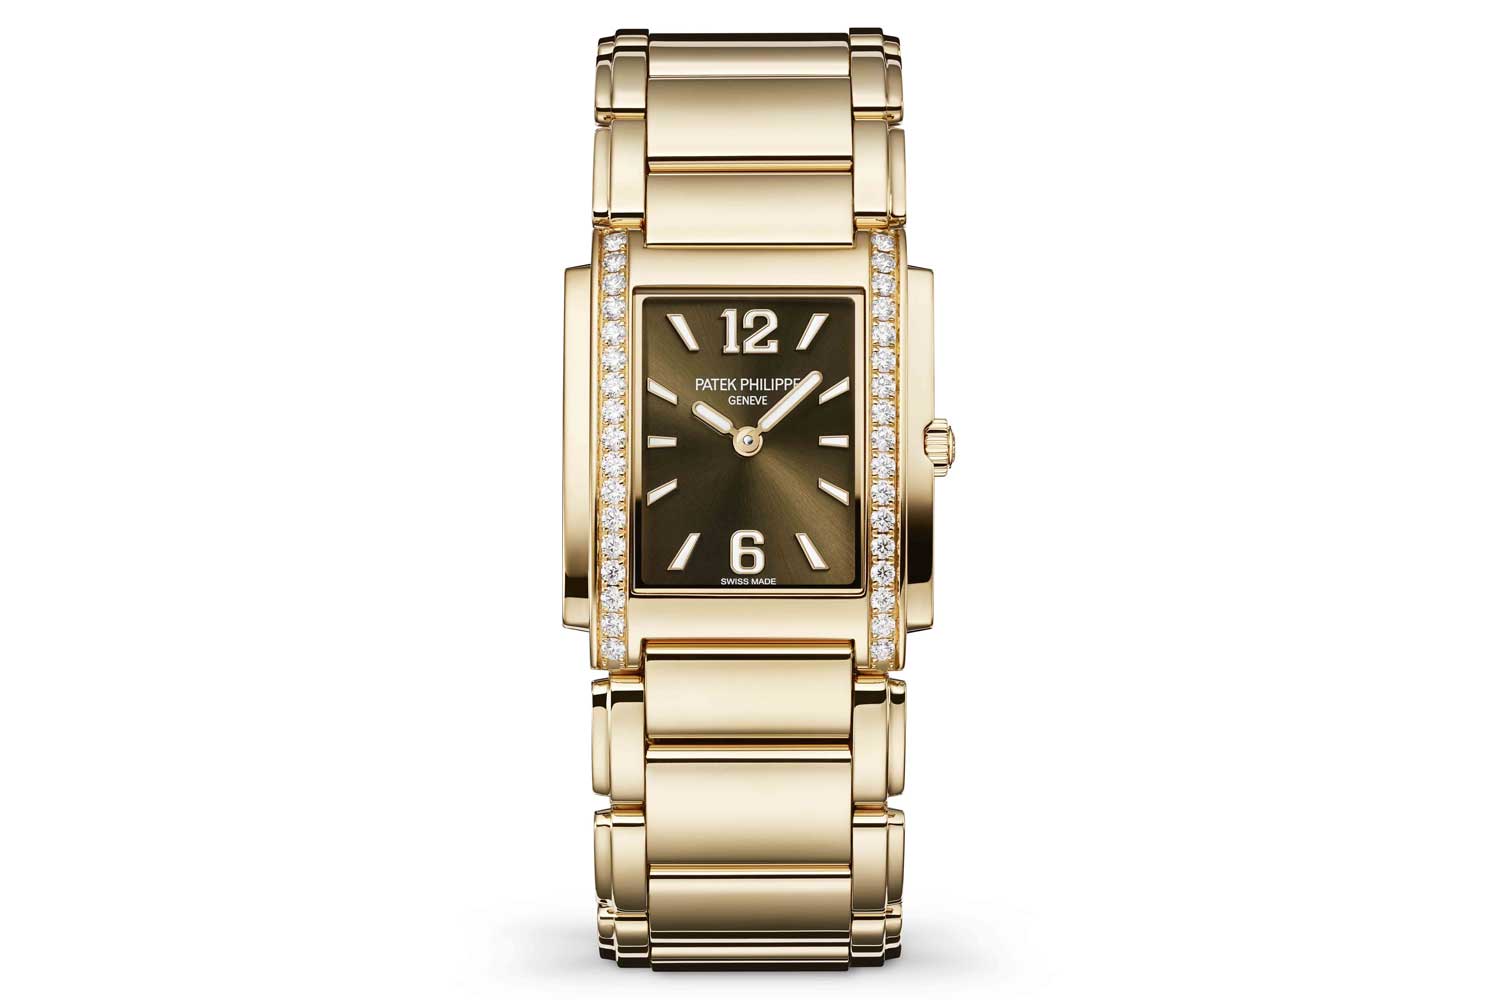 New Copy Watches in Patek Philippe’s Twenty~4 Collection